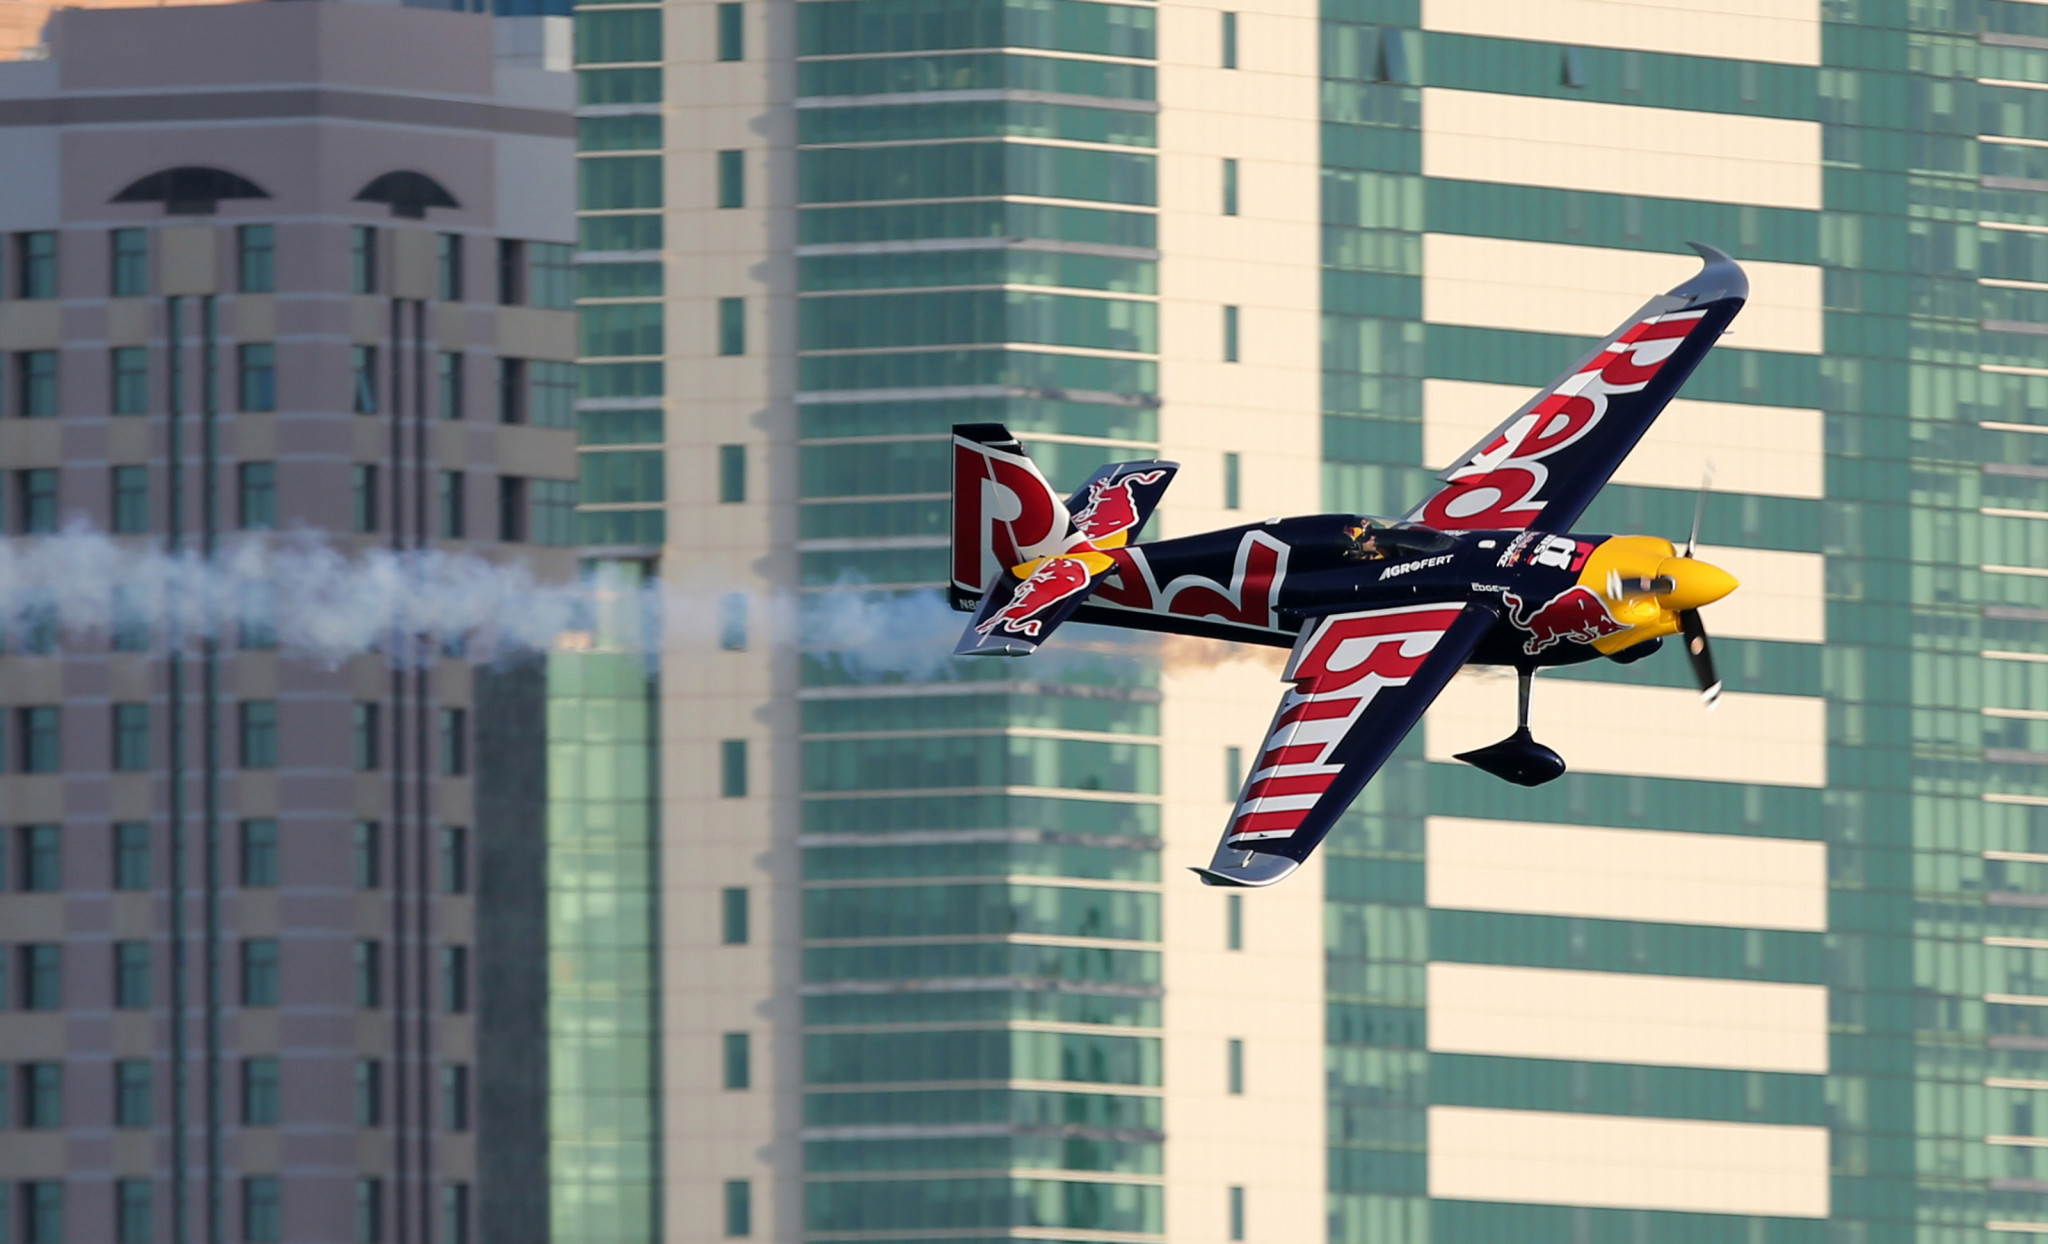 Energy drinks giant Red Bull will axe its Air Race World Championships at the end of the 2019 season ©Getty Images